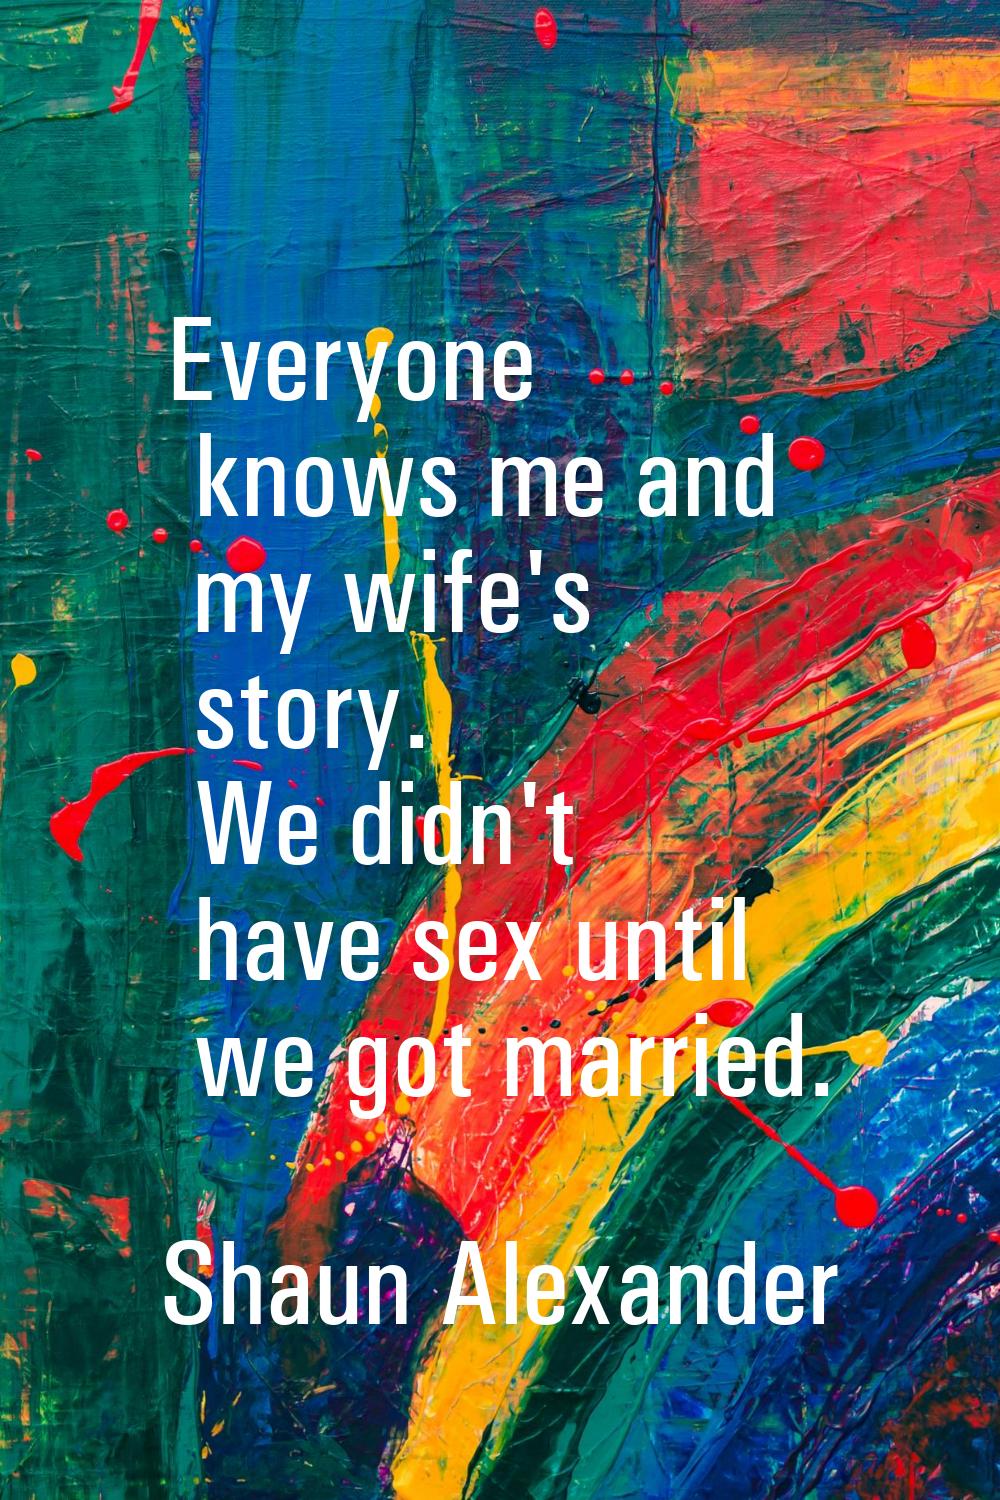 Everyone knows me and my wife's story. We didn't have sex until we got married.